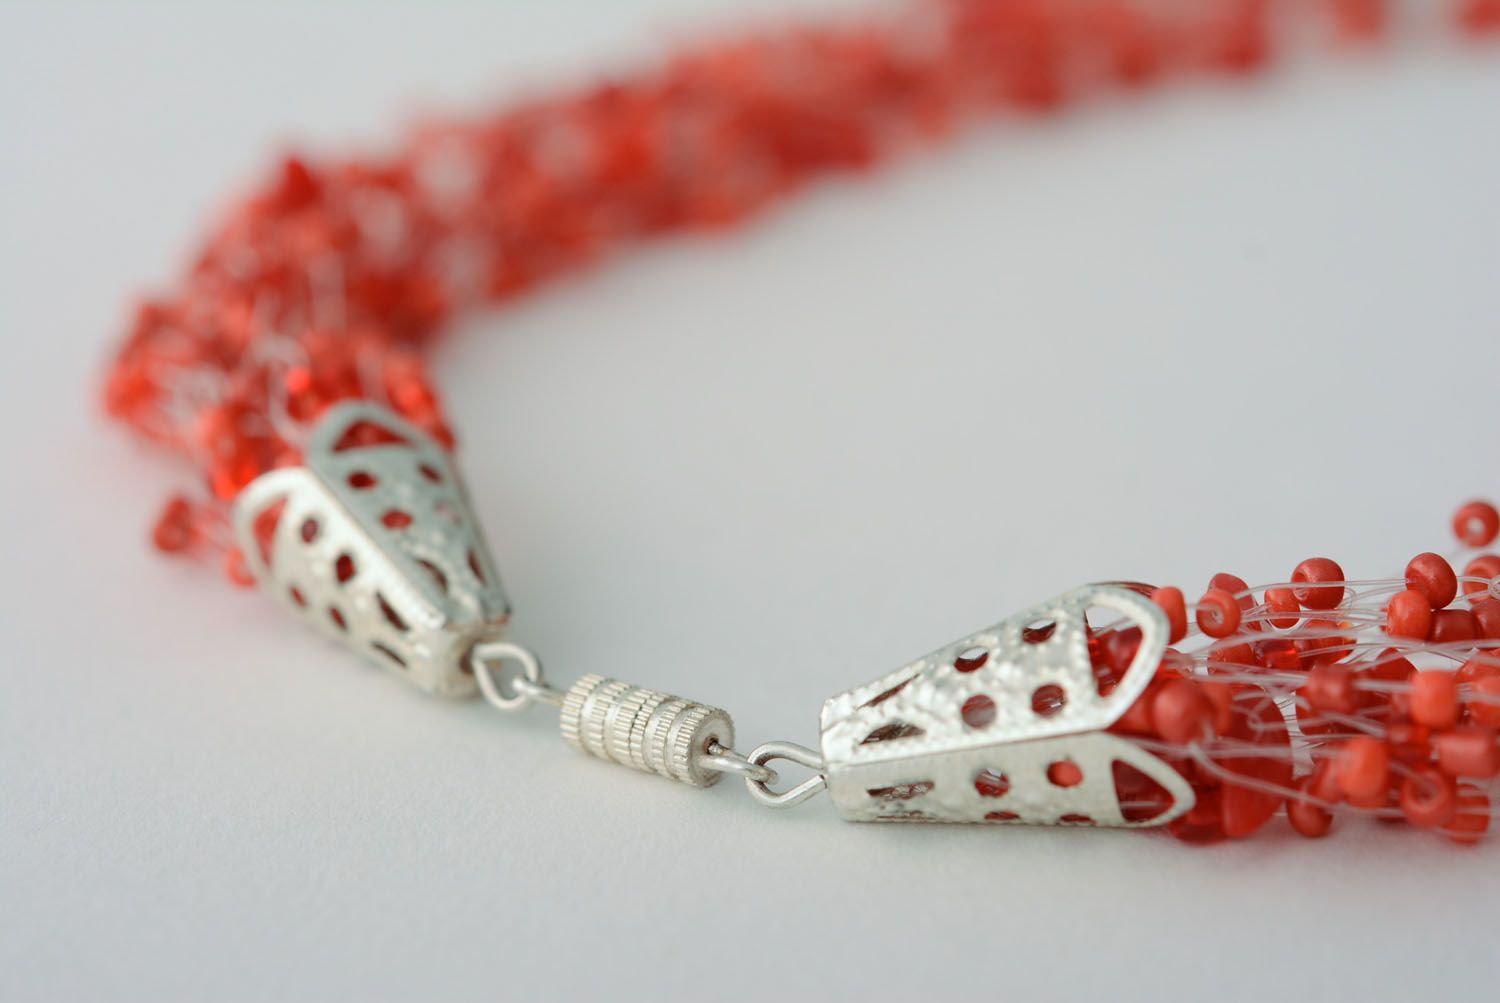 Red beaded necklace photo 4